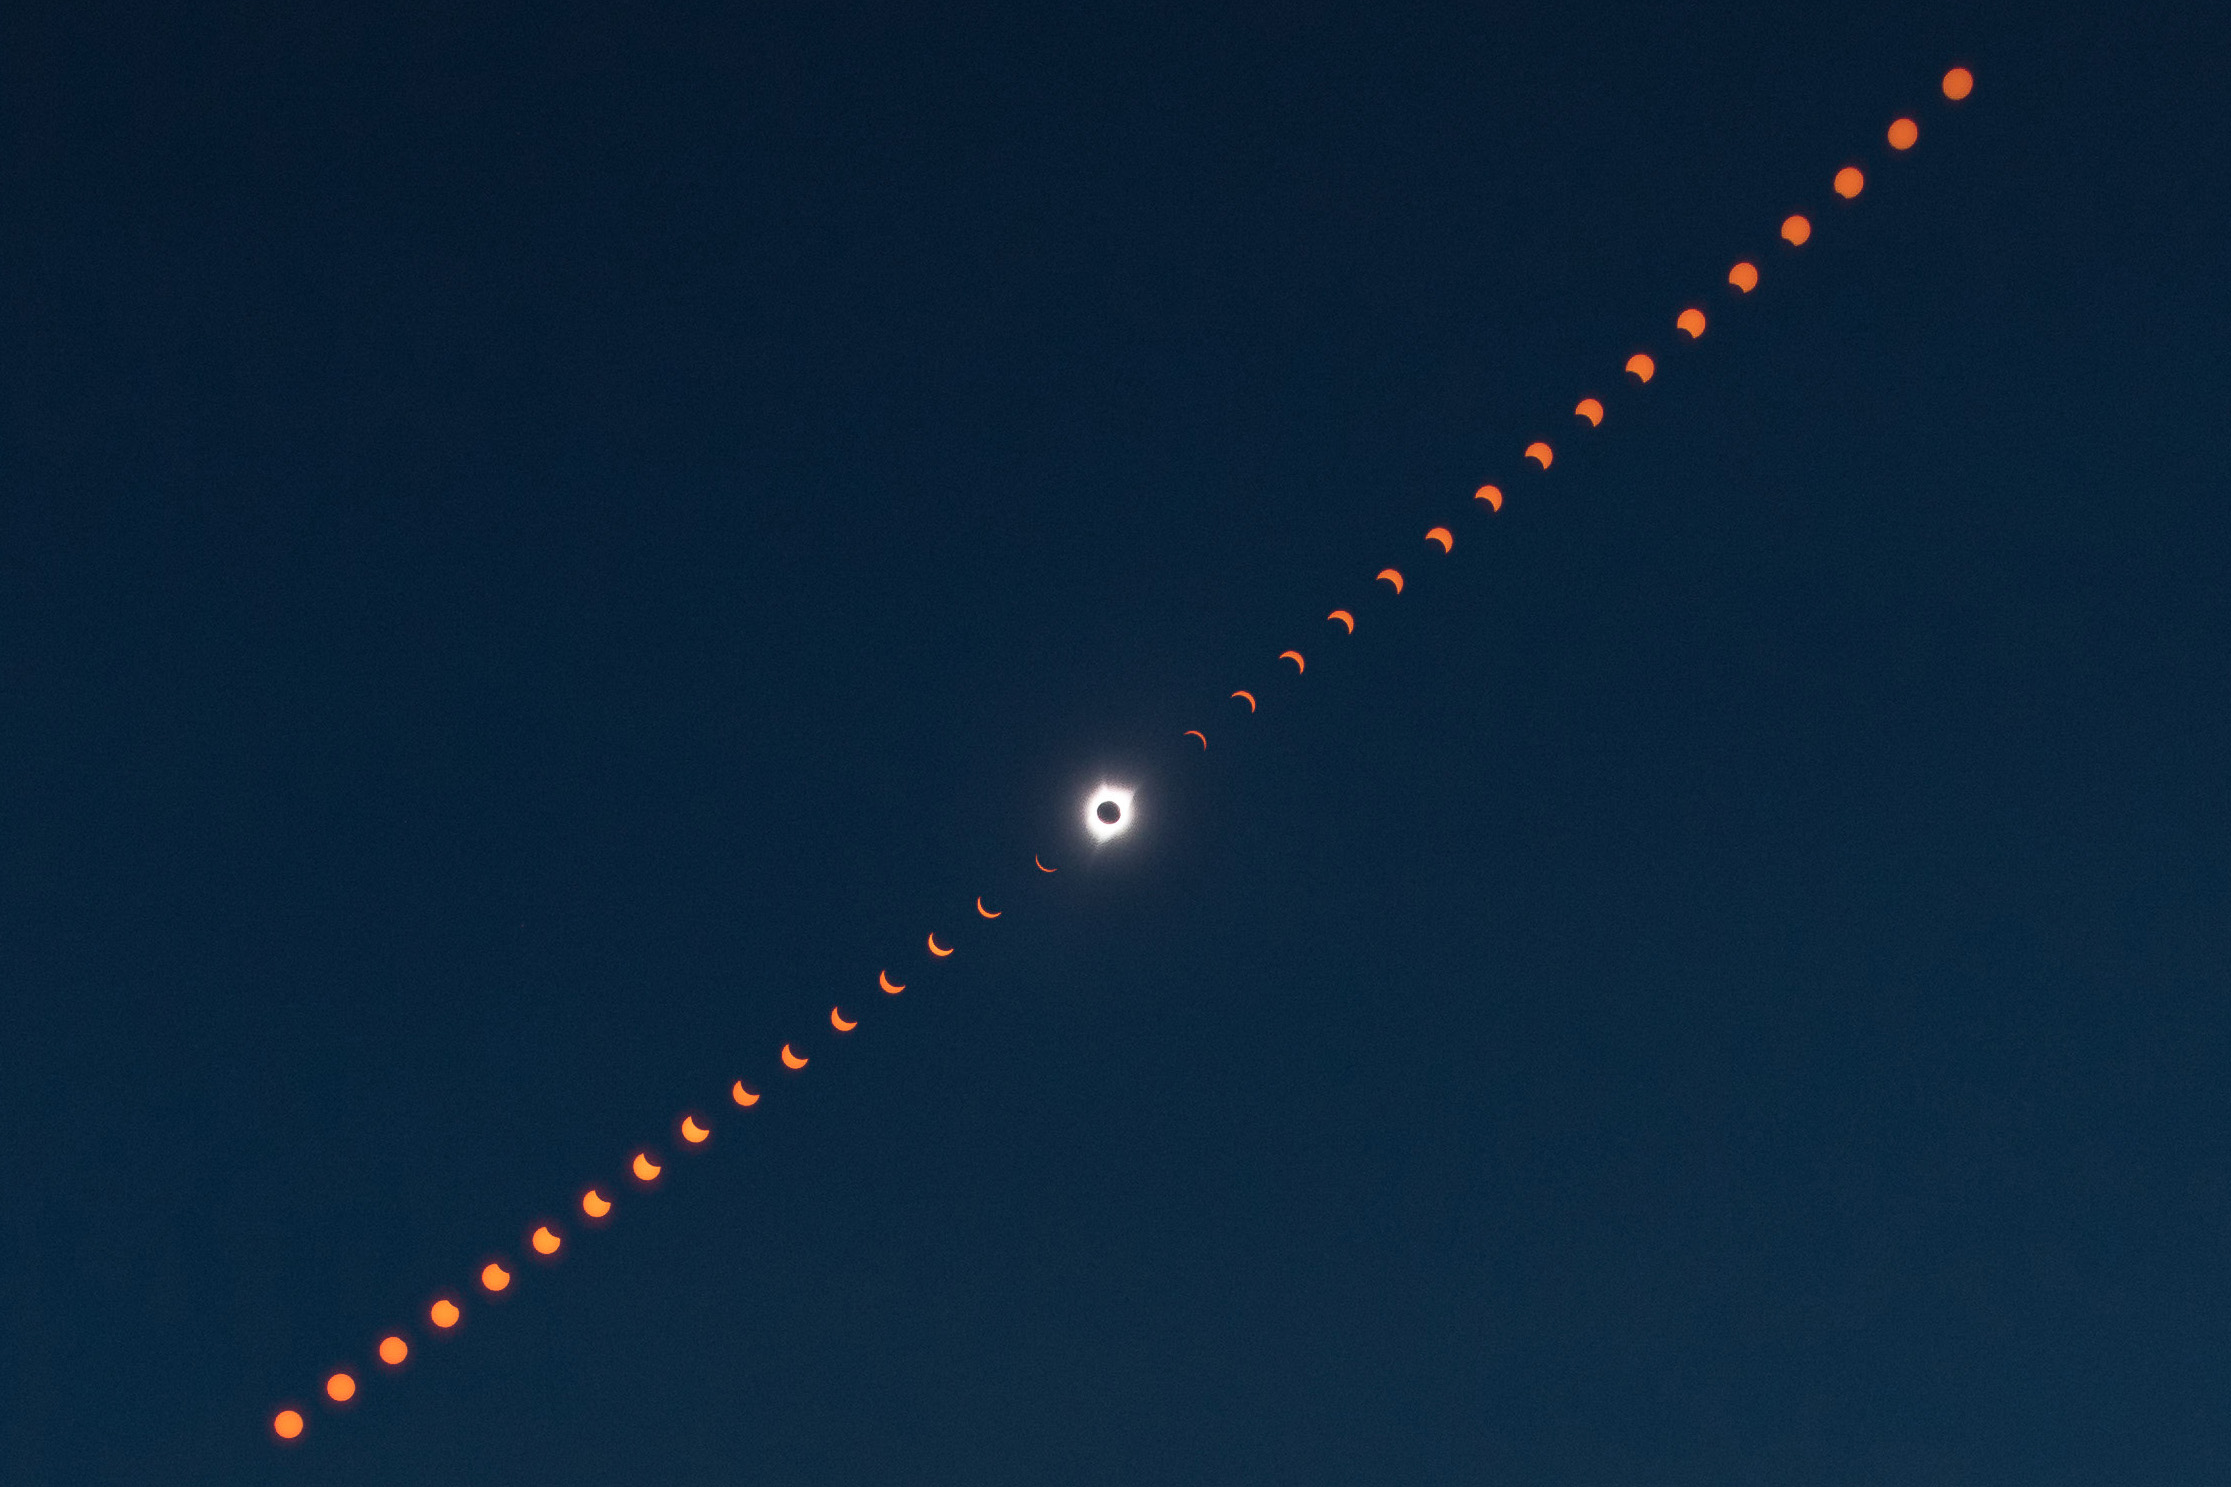 This image is a composite photograph that shows the progression of the total solar eclipse over Madras, Oregon.http://earthobservatory.nasa.gov/NaturalHazards/view.php?id=90796